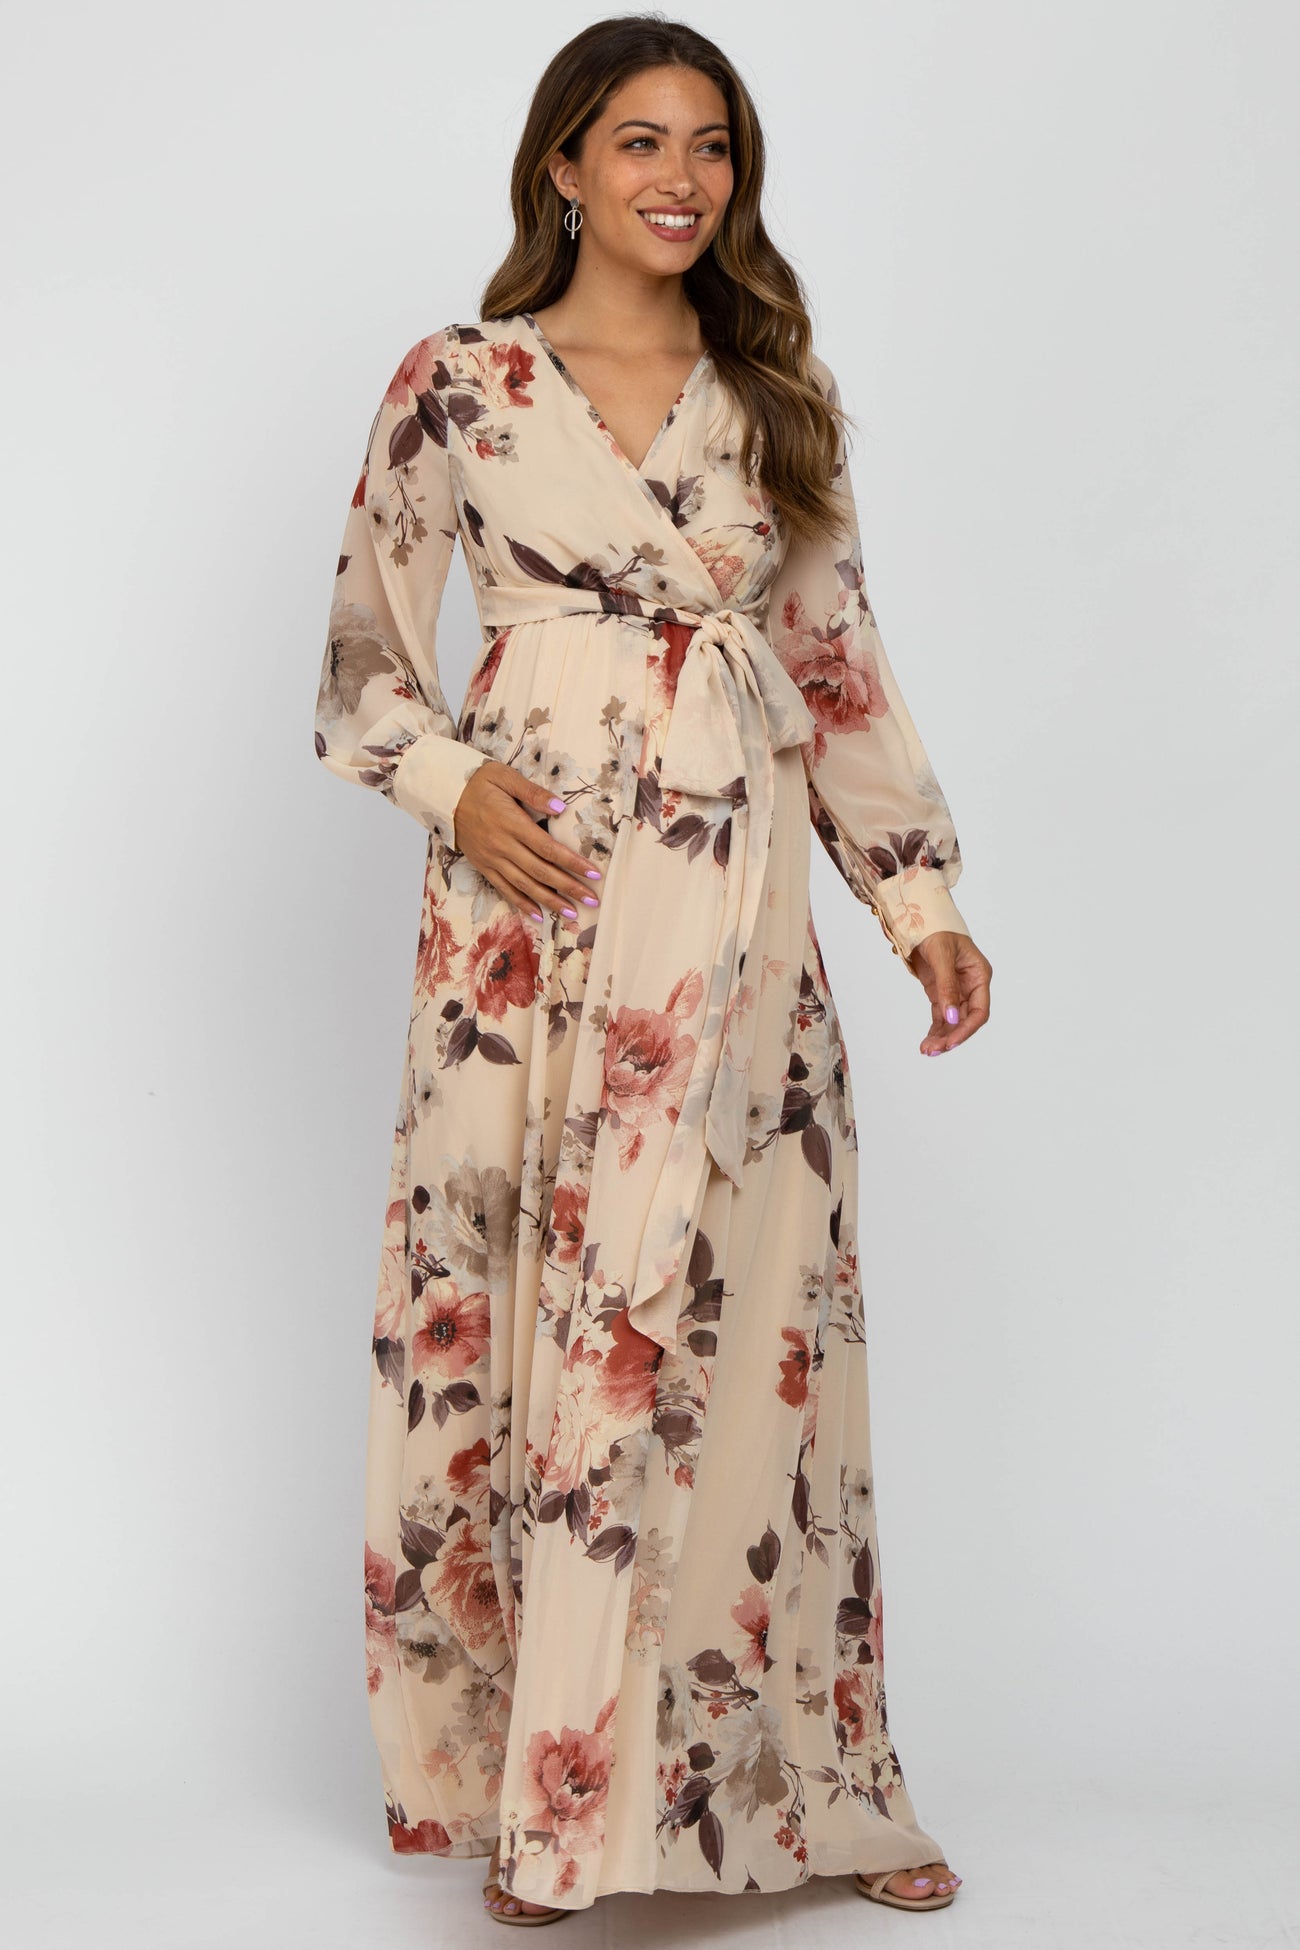 Morph Maternity Half Sleeves Floral Botanical Printed Maternity Feeding  Dress With Hidden Zip Beige Online in India, Buy at Best Price from   - 13201241